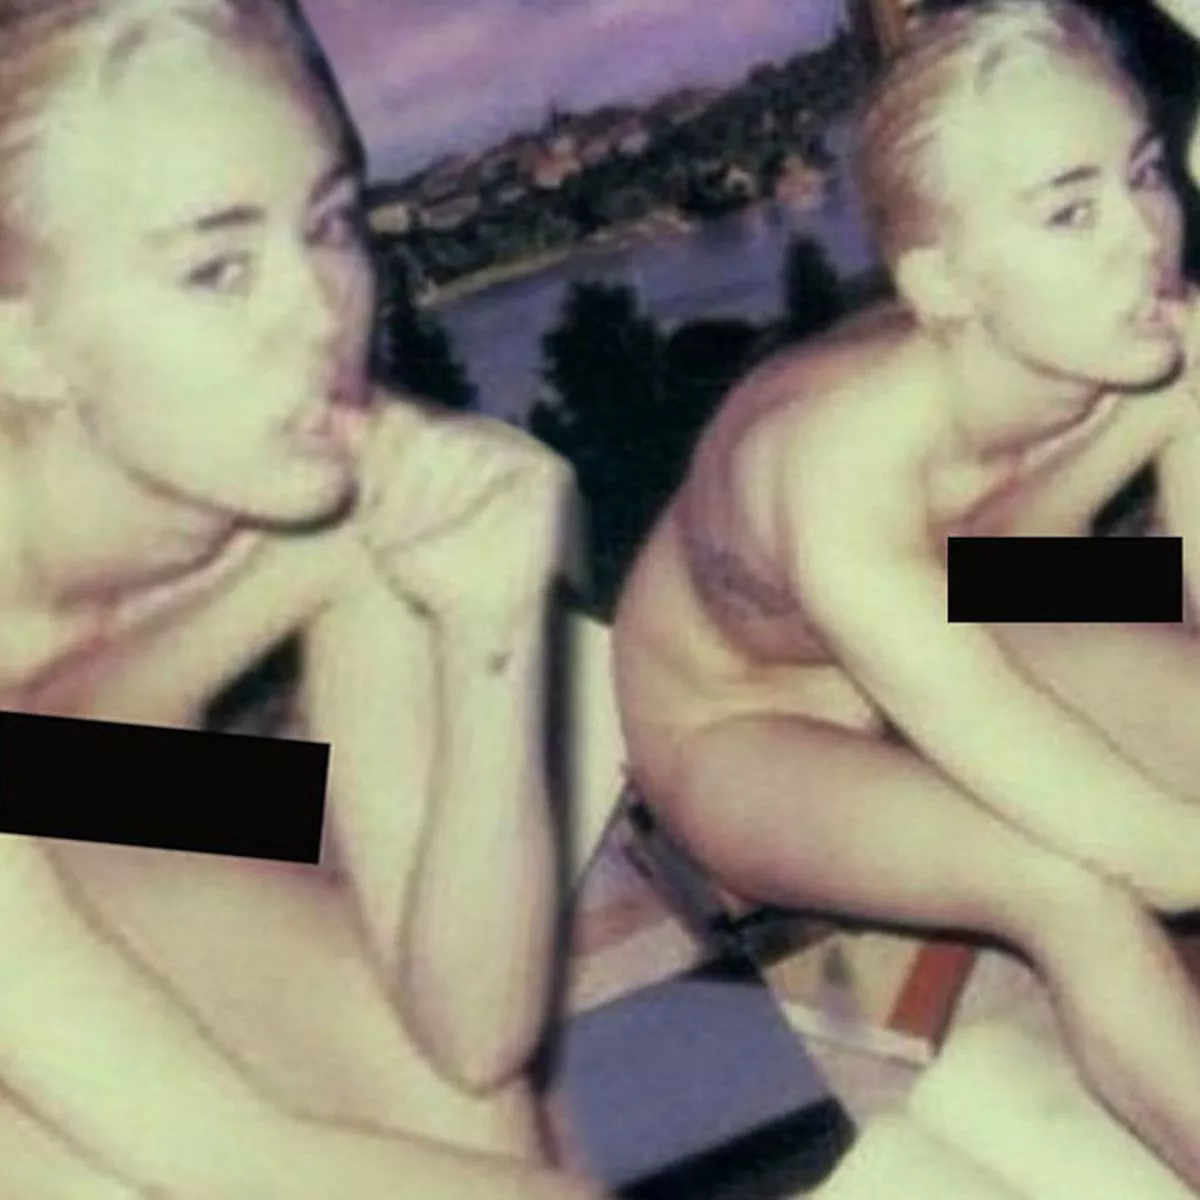 dewi angin recommends pics of miley cyrus having sex pic